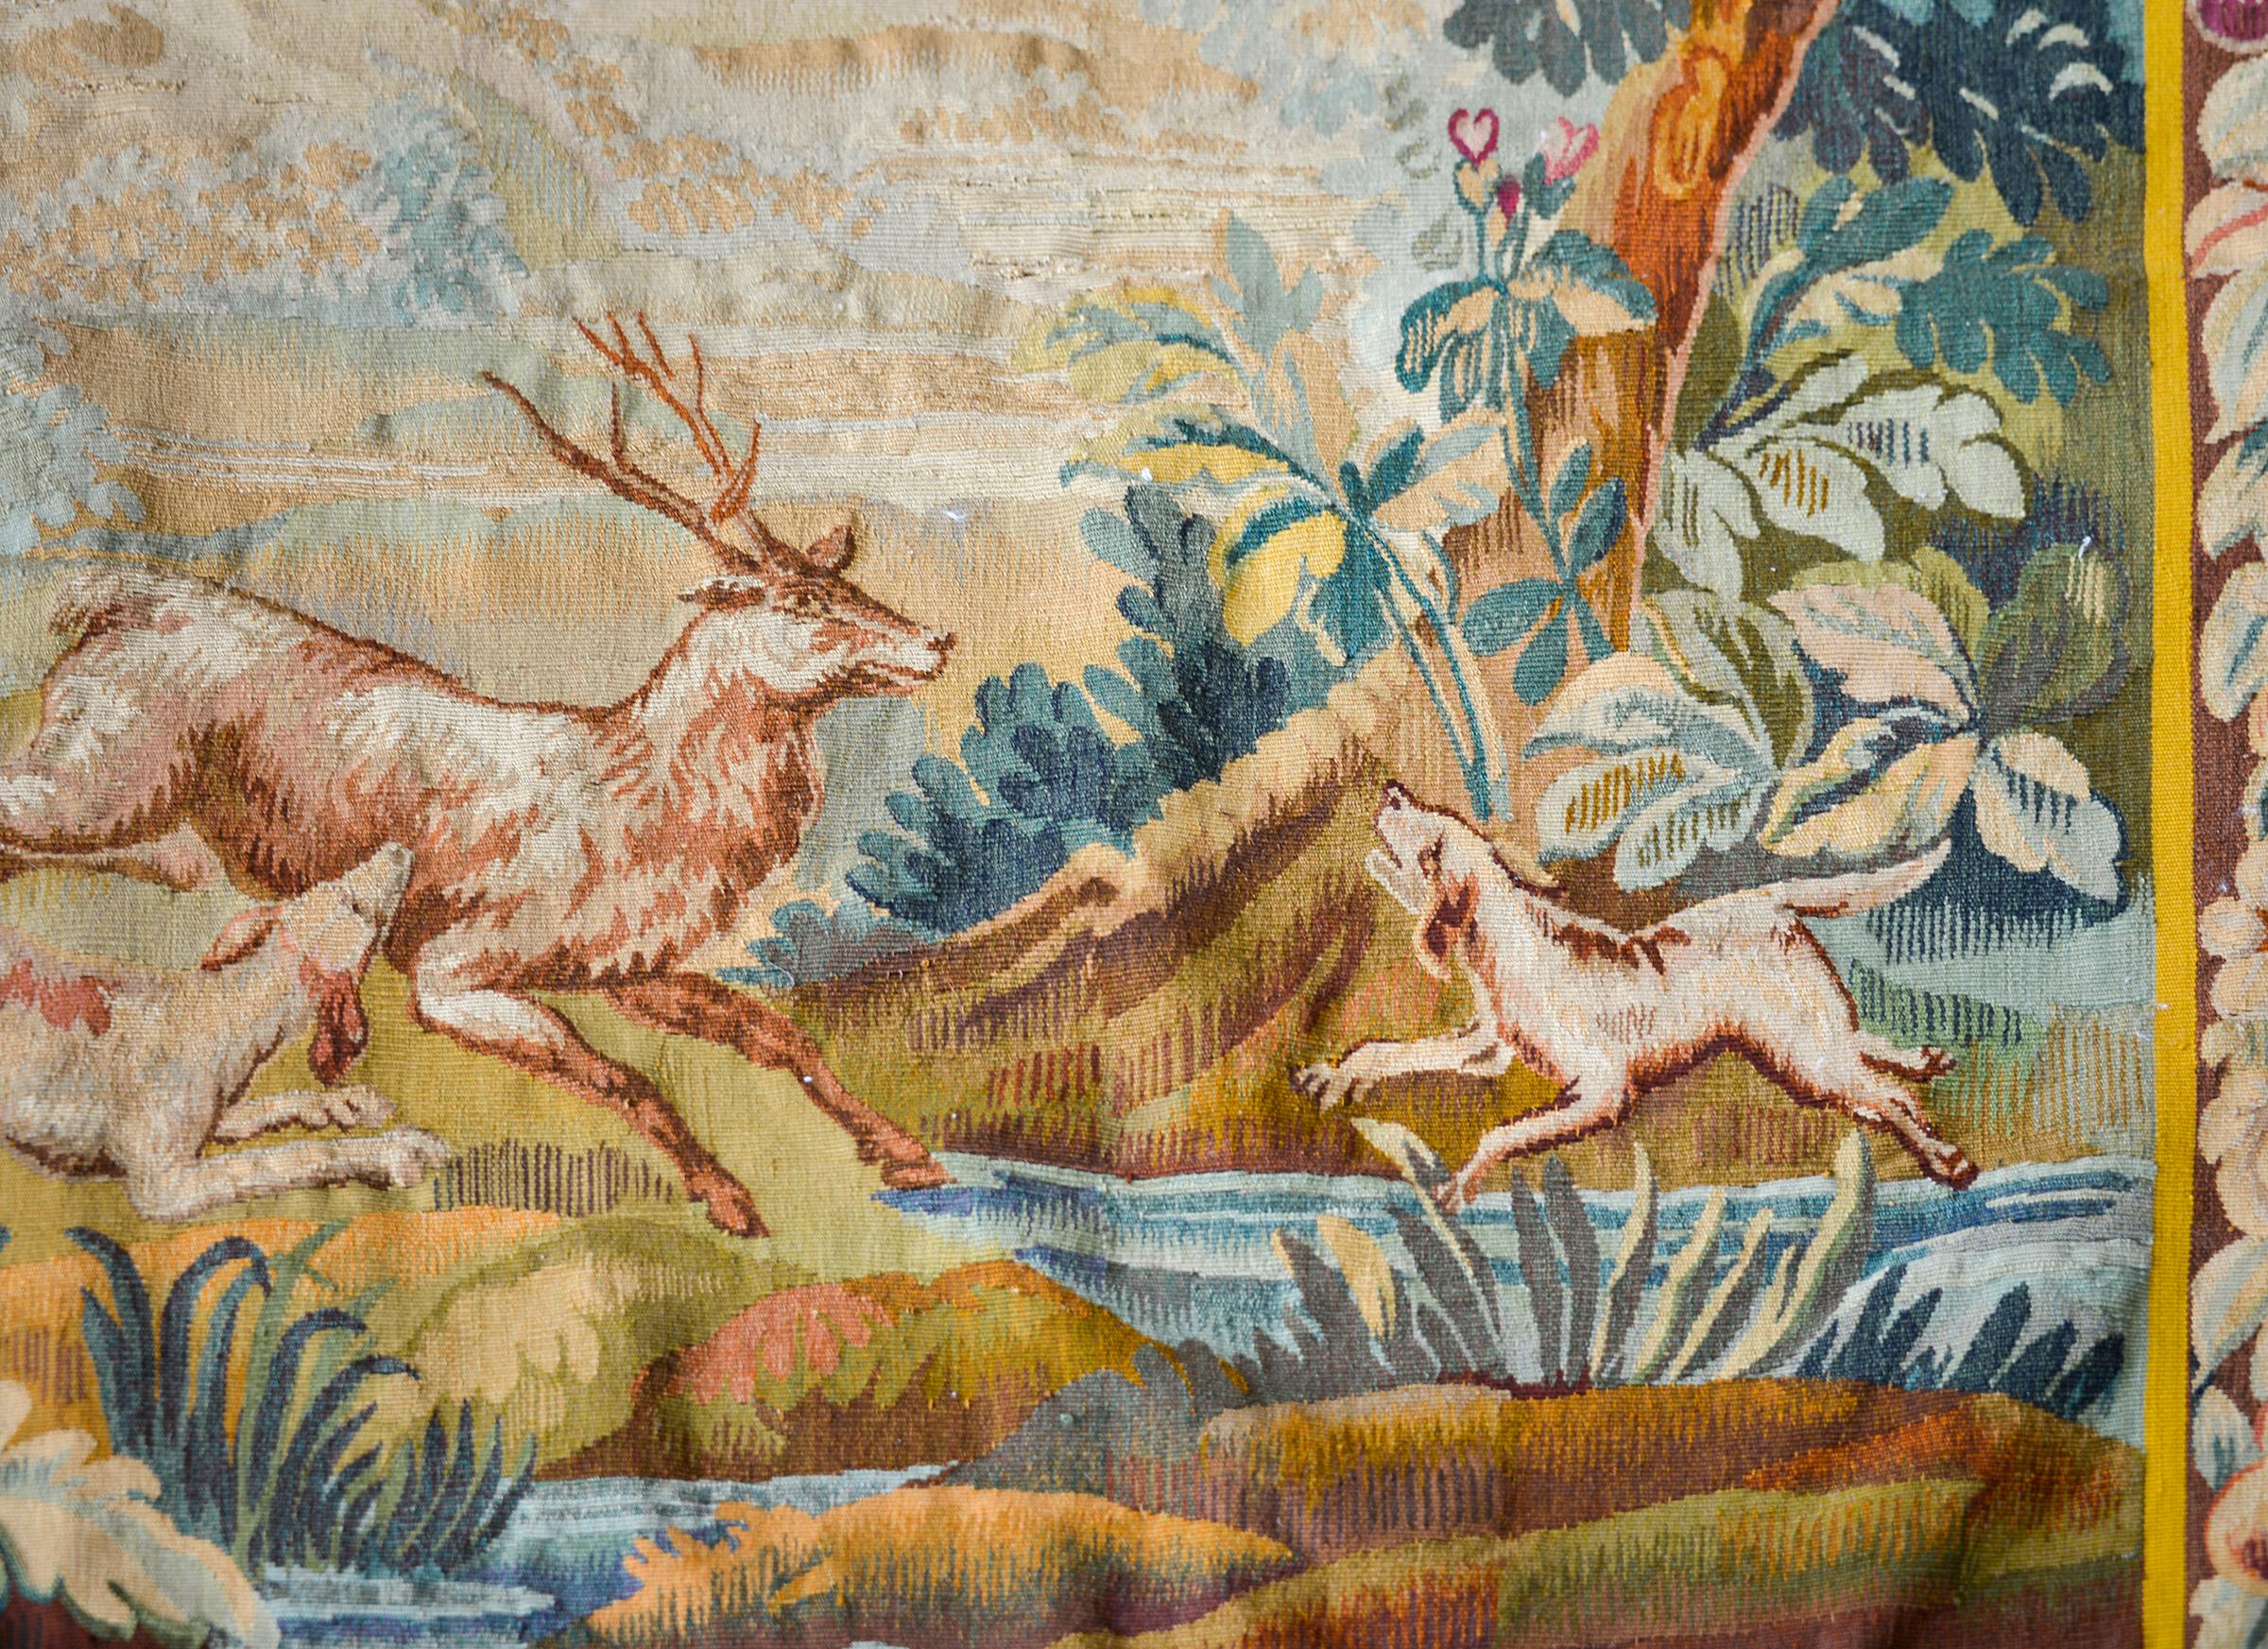 A beautiful late 19th century French Aubusson tapestry depicting a hunt scene with a hunter mounted on horse with two hounds chasing a stag through a forest landscape and a castle in the background. The border with woven with a fruit and floral